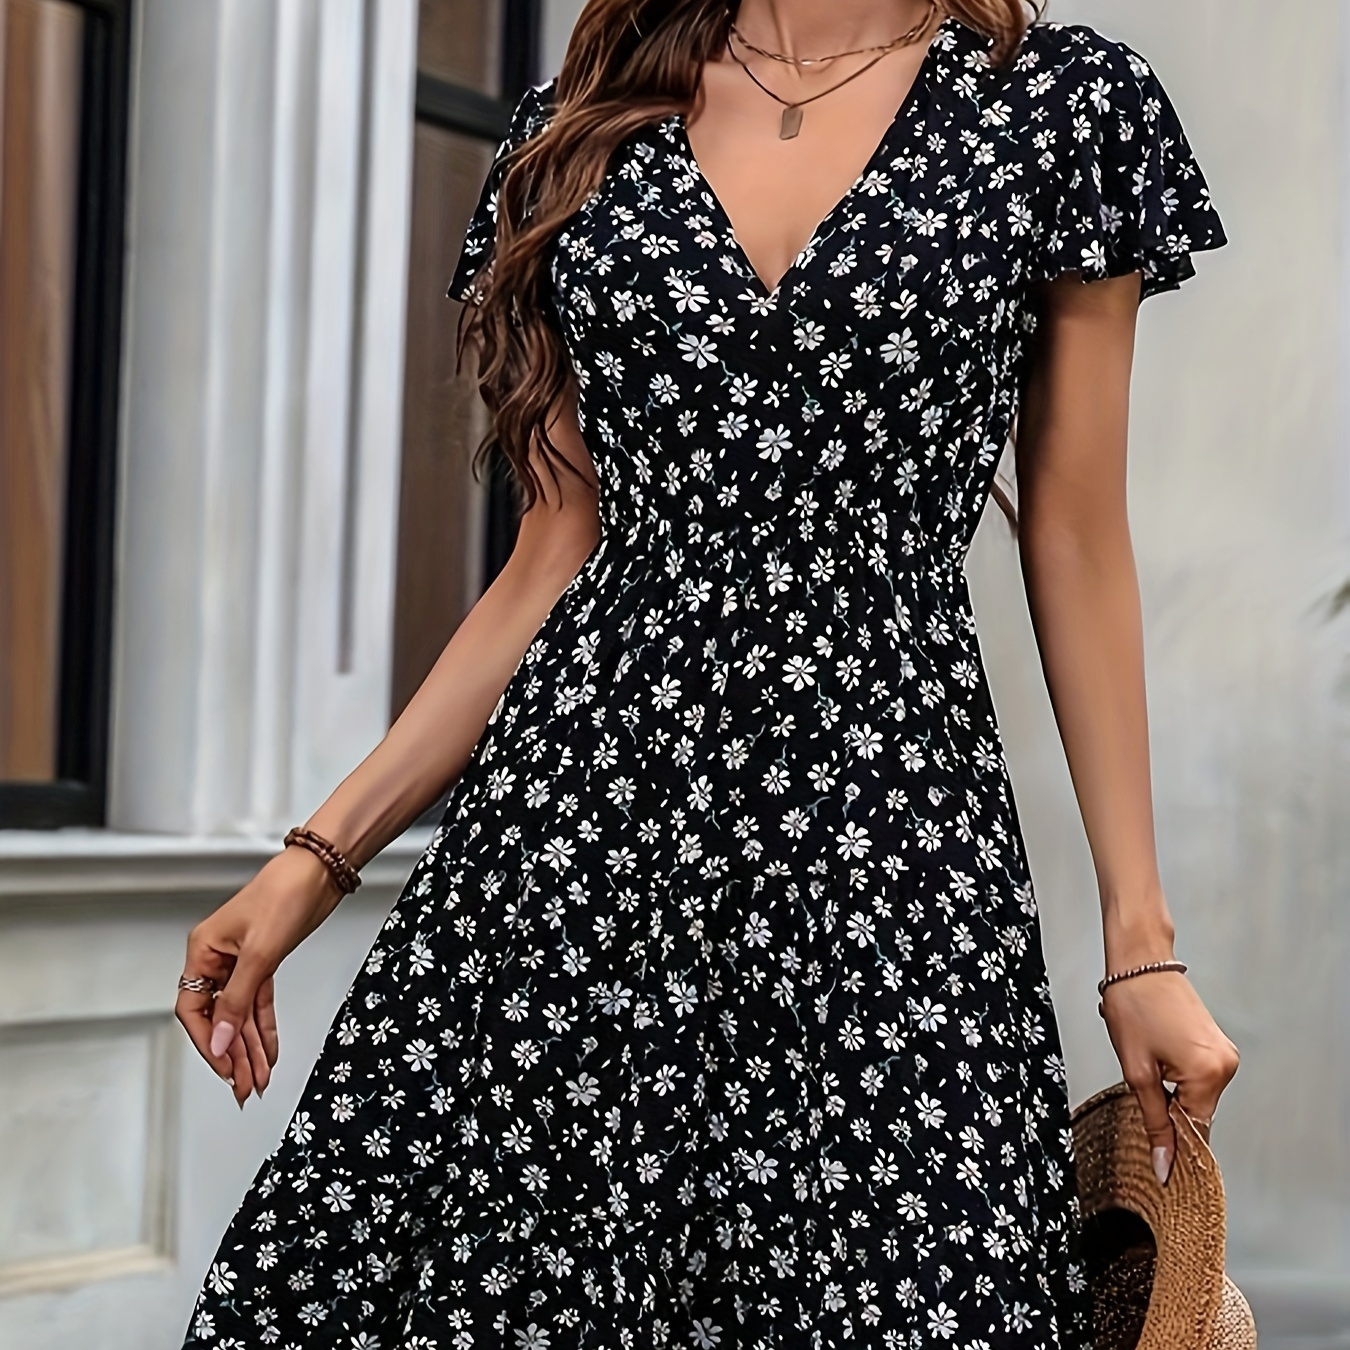 

Floral Print V-neck Dress, Casual Ruffle Sleeve Dress For Spring & Summer, Women's Clothing